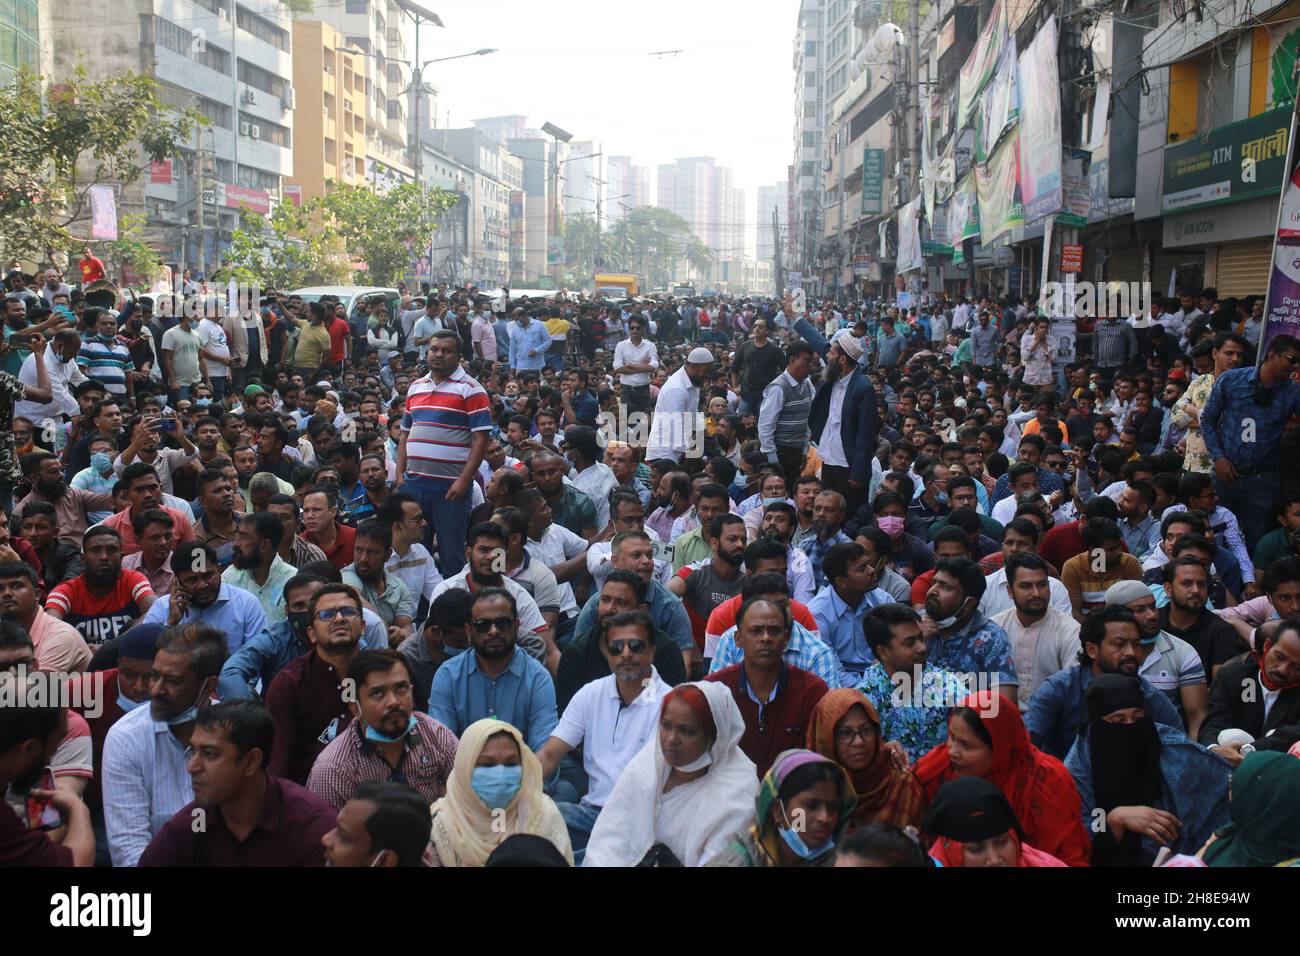 Activists of the Bangladesh Nationalist Party (BNP) sit on road during Bangladesh Nationalist Party’s protest rally demanding the government to allow party's chairperson Begum Khaleda Zia to be allowed international travel for better health treatment in Dhaka, Bangladesh. Stock Photo